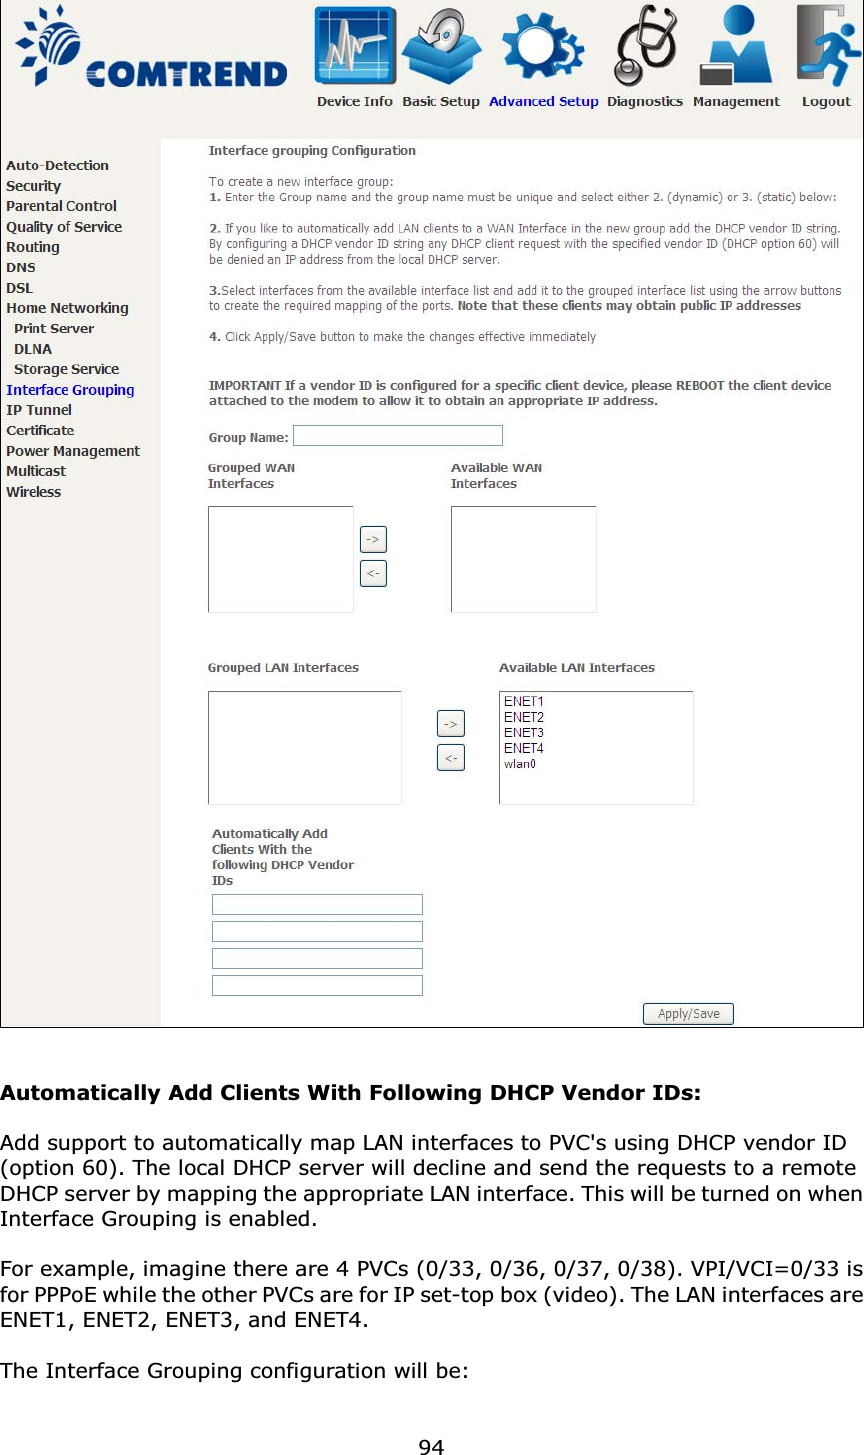 94Automatically Add Clients With Following DHCP Vendor IDs:Add support to automatically map LAN interfaces to PVC&apos;s using DHCP vendor ID (option 60). The local DHCP server will decline and send the requests to a remote DHCP server by mapping the appropriate LAN interface. This will be turned on when Interface Grouping is enabled.For example, imagine there are 4 PVCs (0/33, 0/36, 0/37, 0/38). VPI/VCI=0/33 is for PPPoE while the other PVCs are for IP set-top box (video). The LAN interfaces are ENET1, ENET2, ENET3, and ENET4.The Interface Grouping configuration will be: